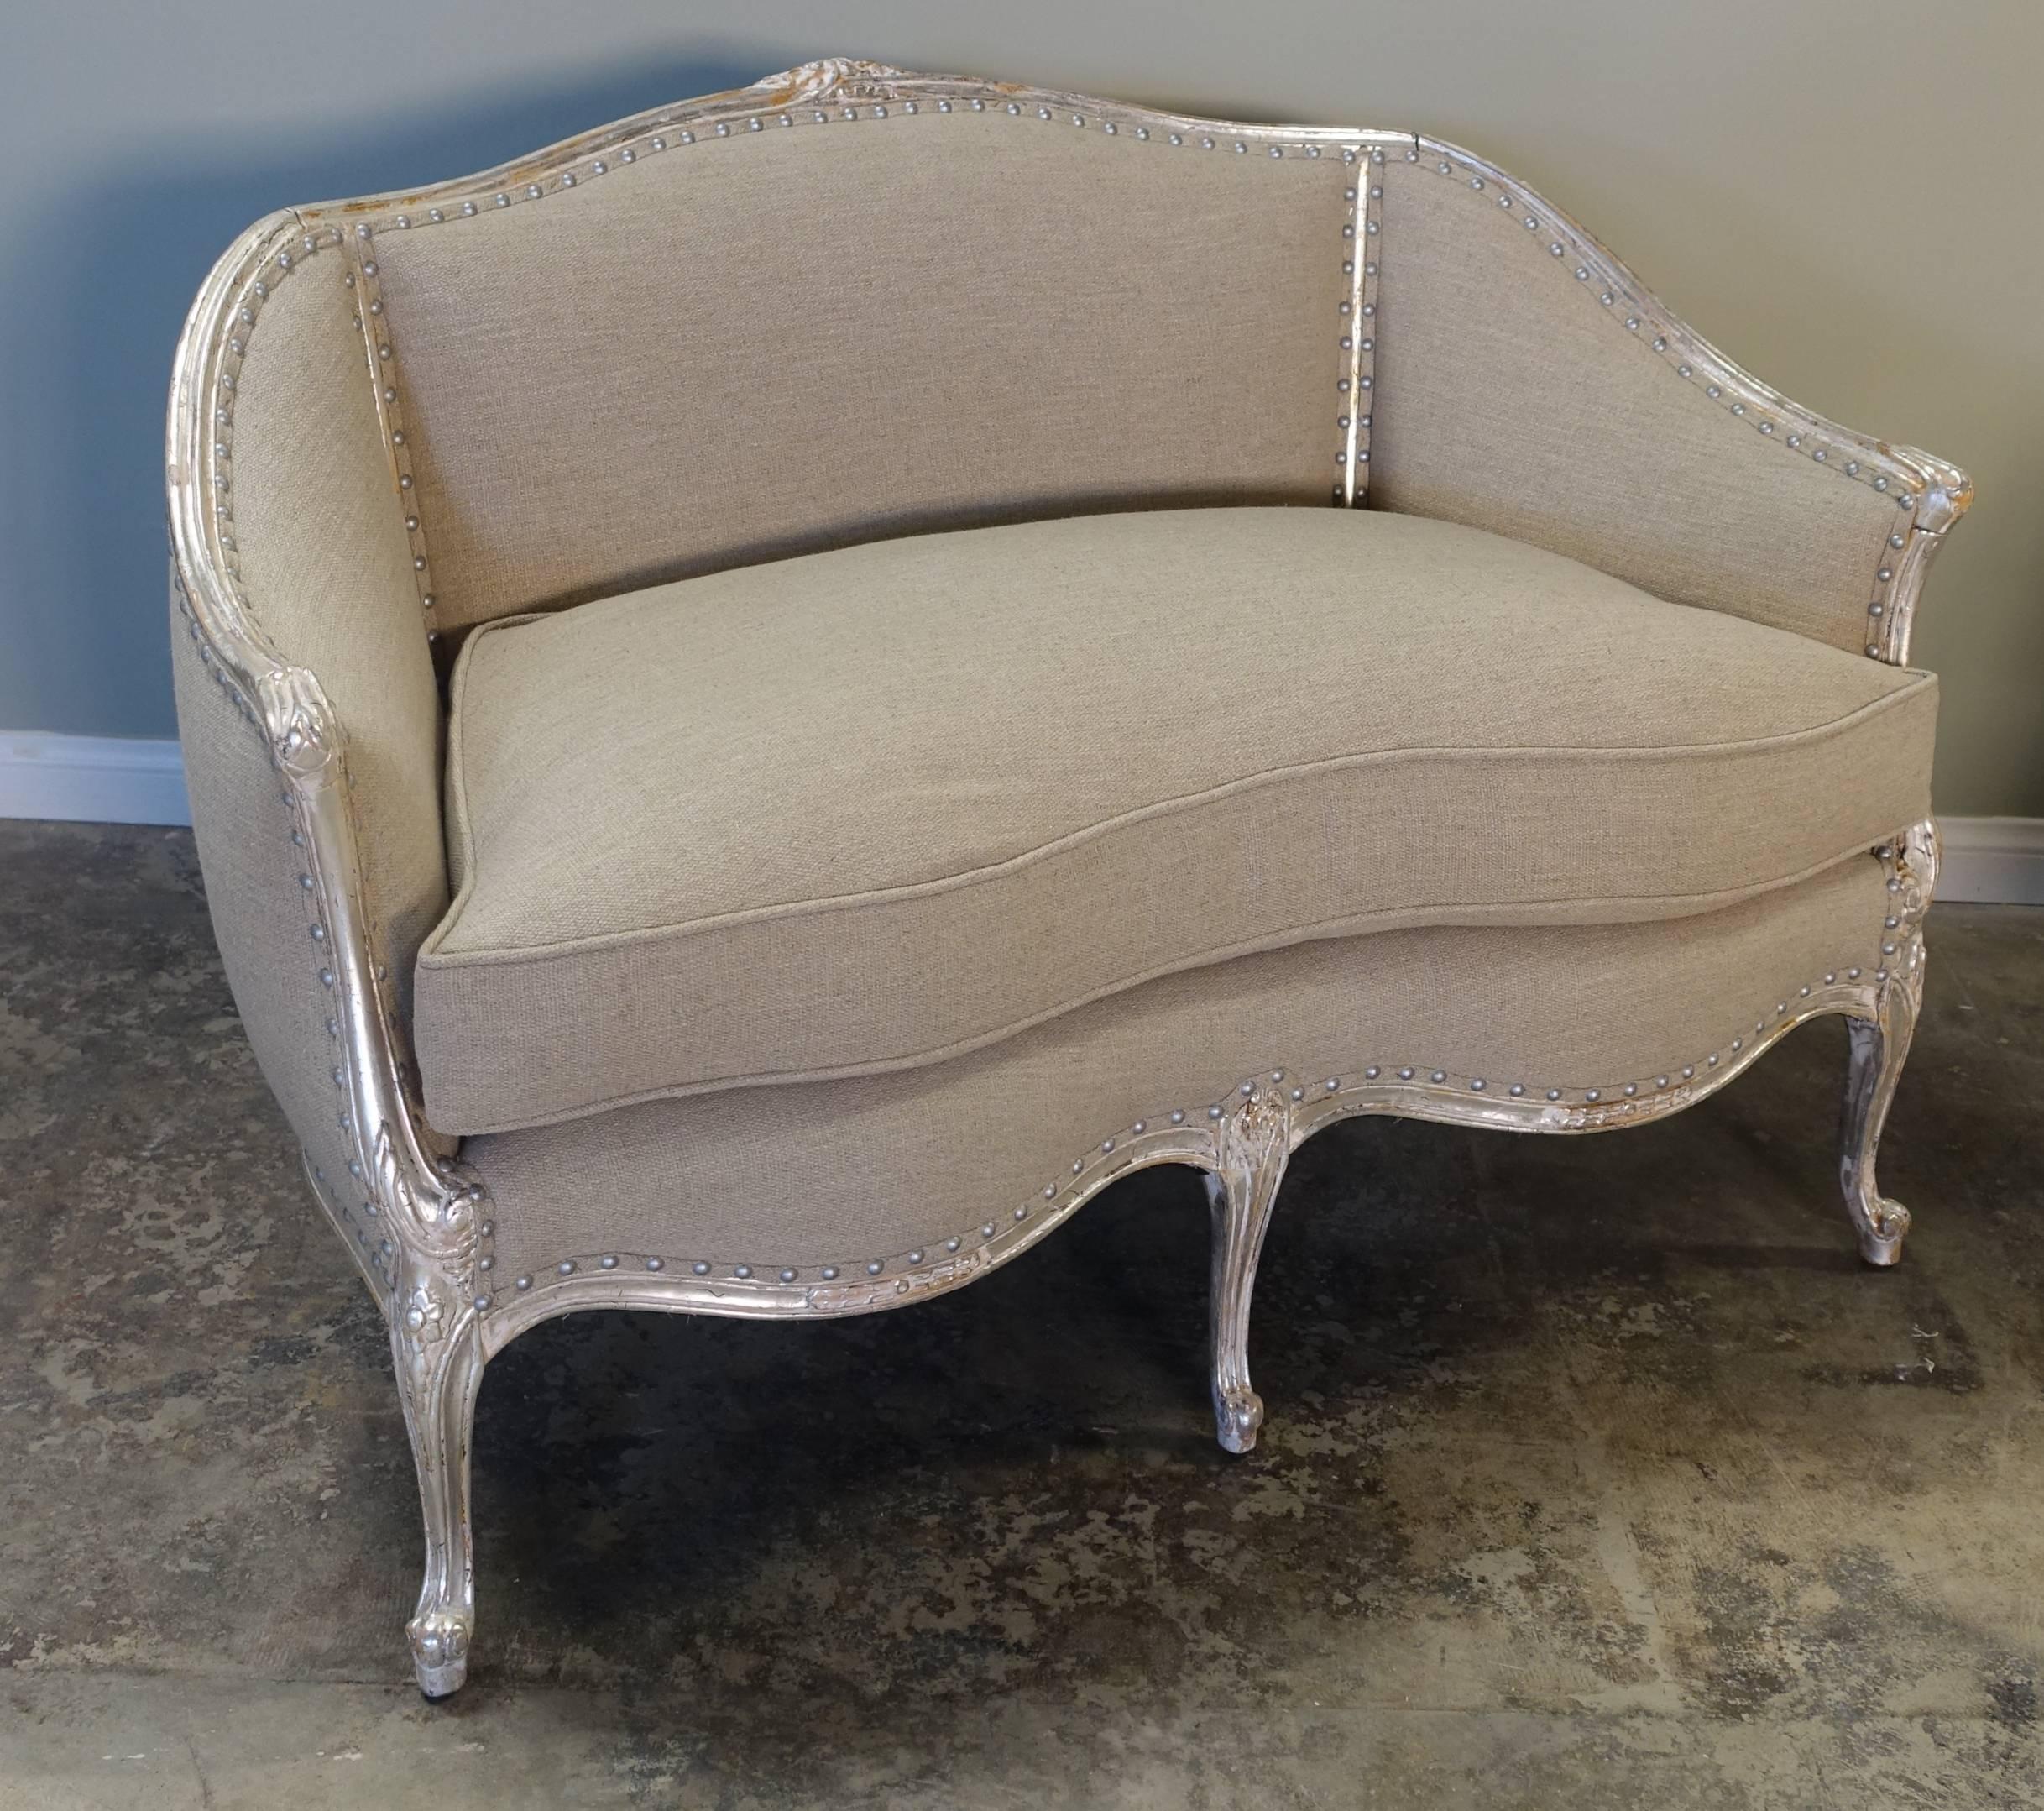 Pair of French carved silvered Louis XV style settees standing on five cabriole legs with rams head feet. Newly upholstered in natural grain colored linen with down filled loose seat cushions. The cushion has a self-cord detail. The settee frame has